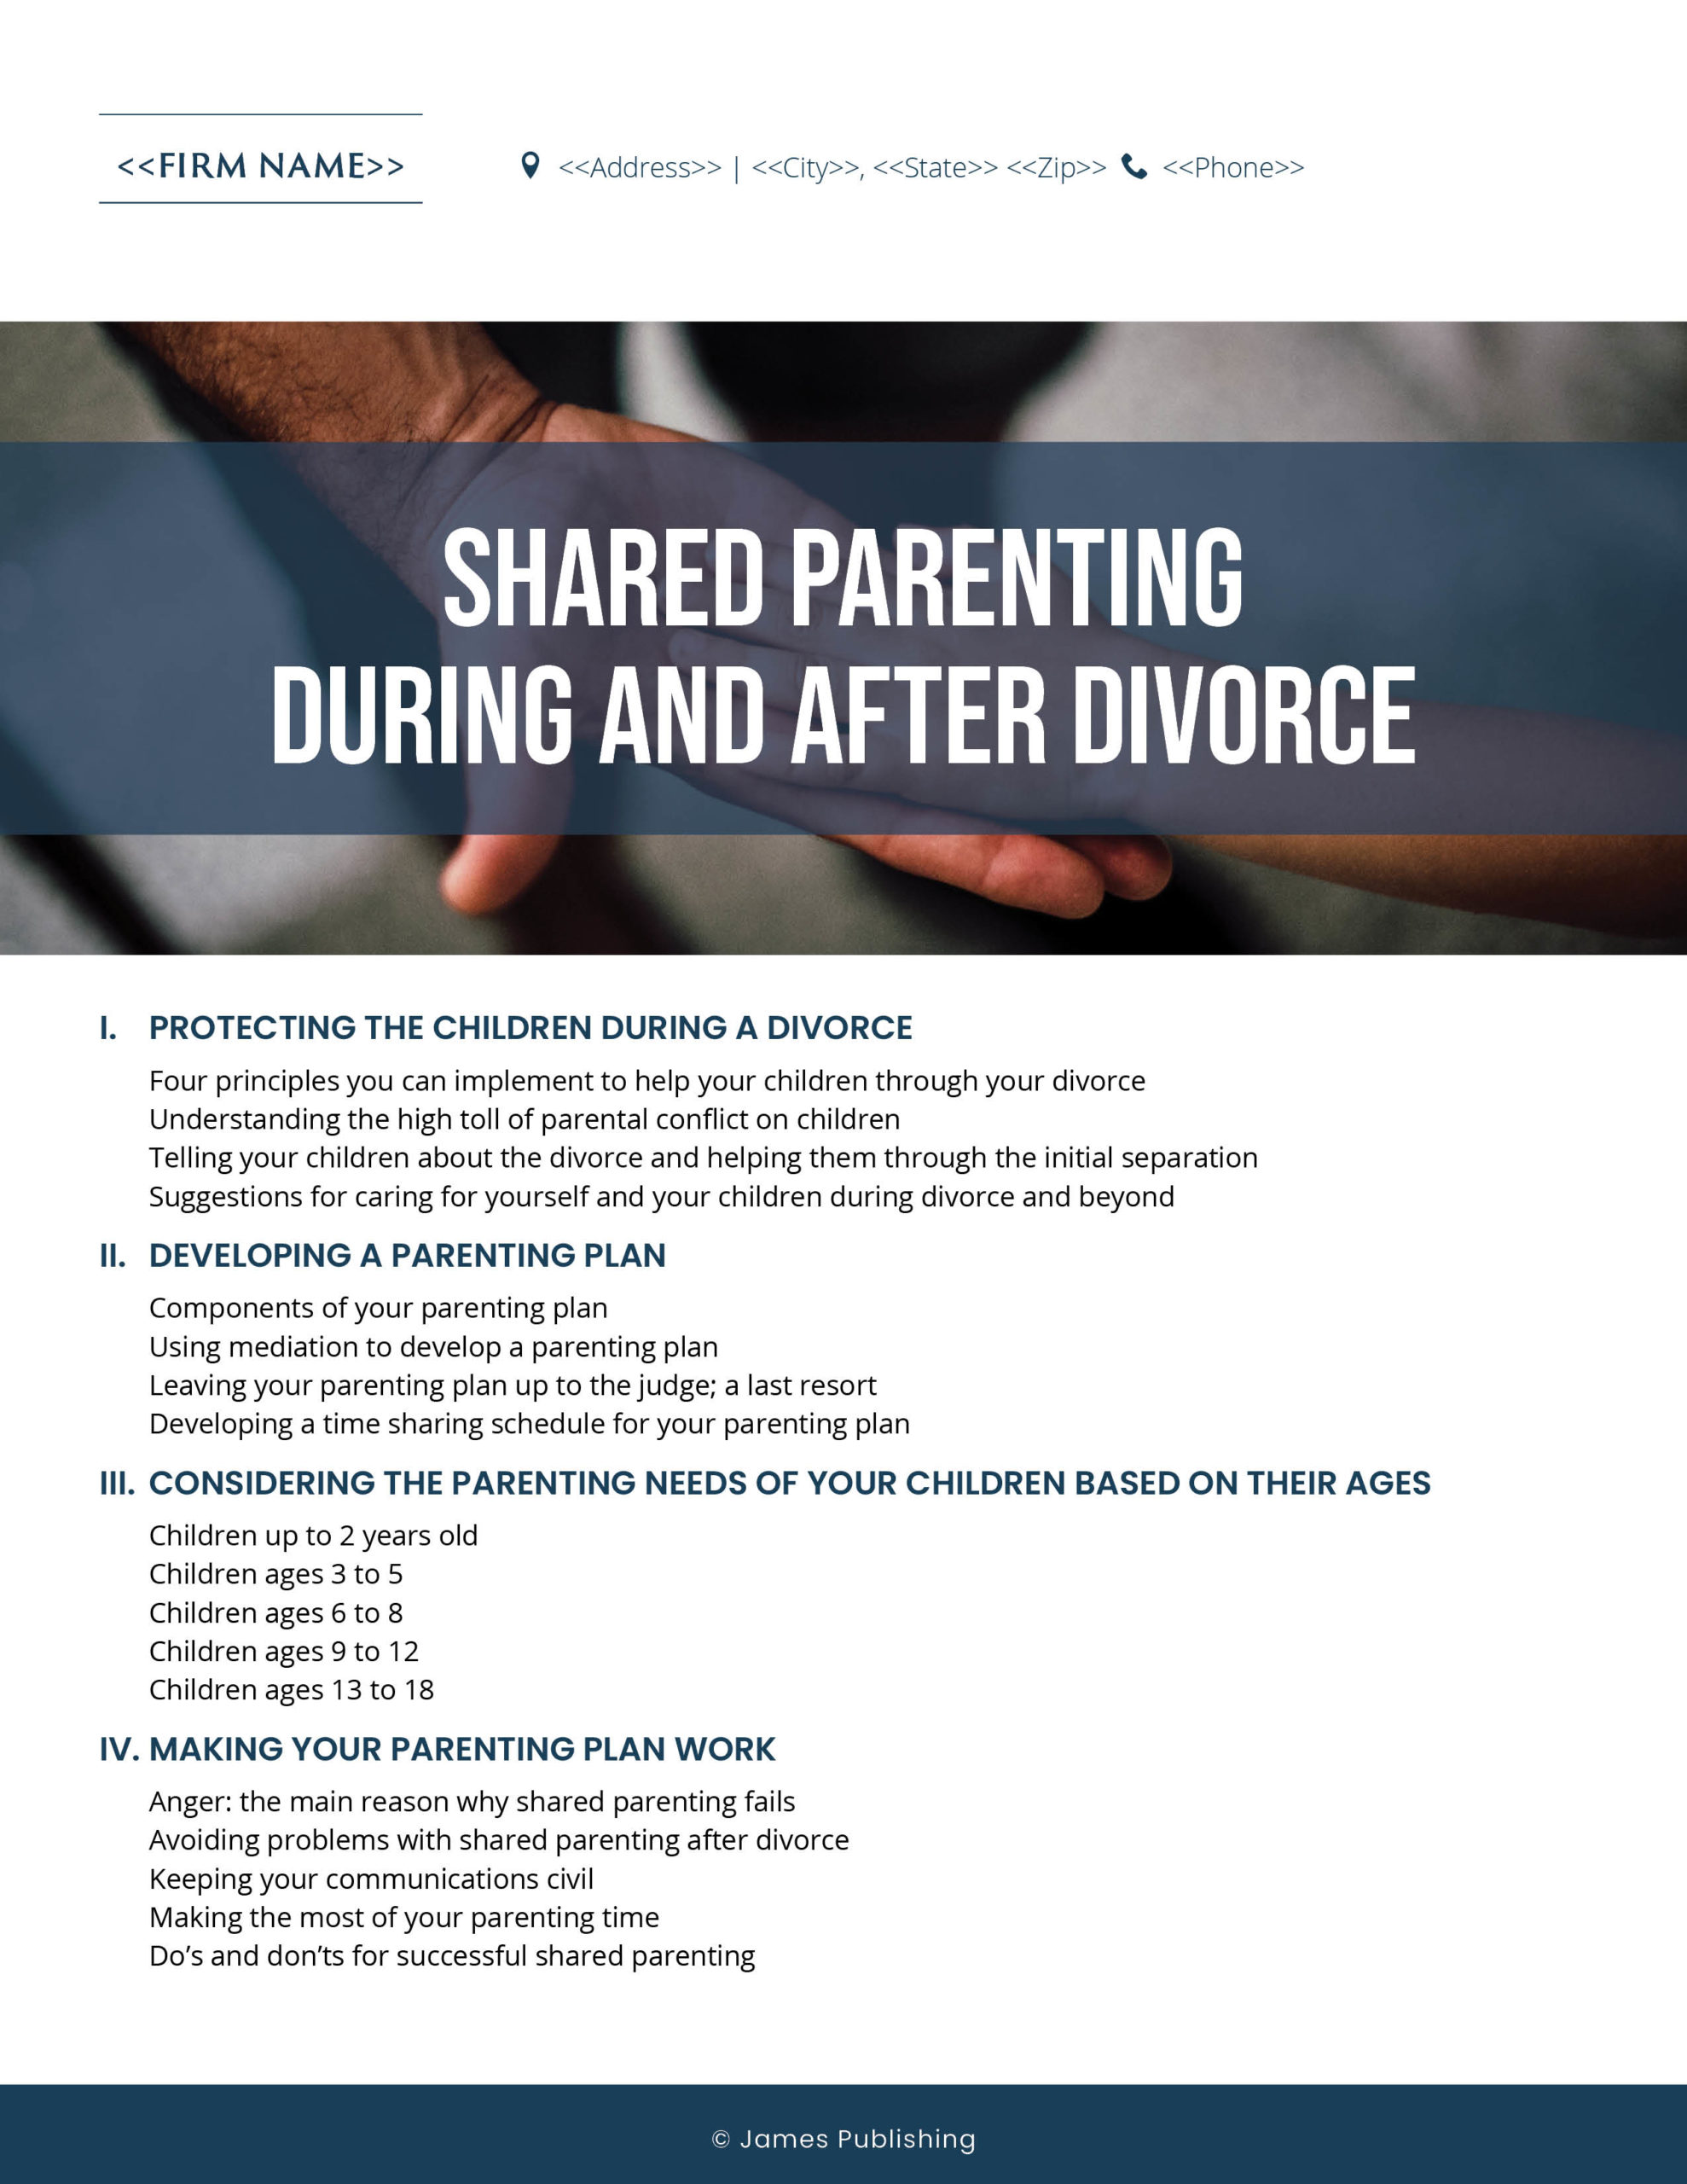 FAM-10 Shared Parenting During and After Divorce